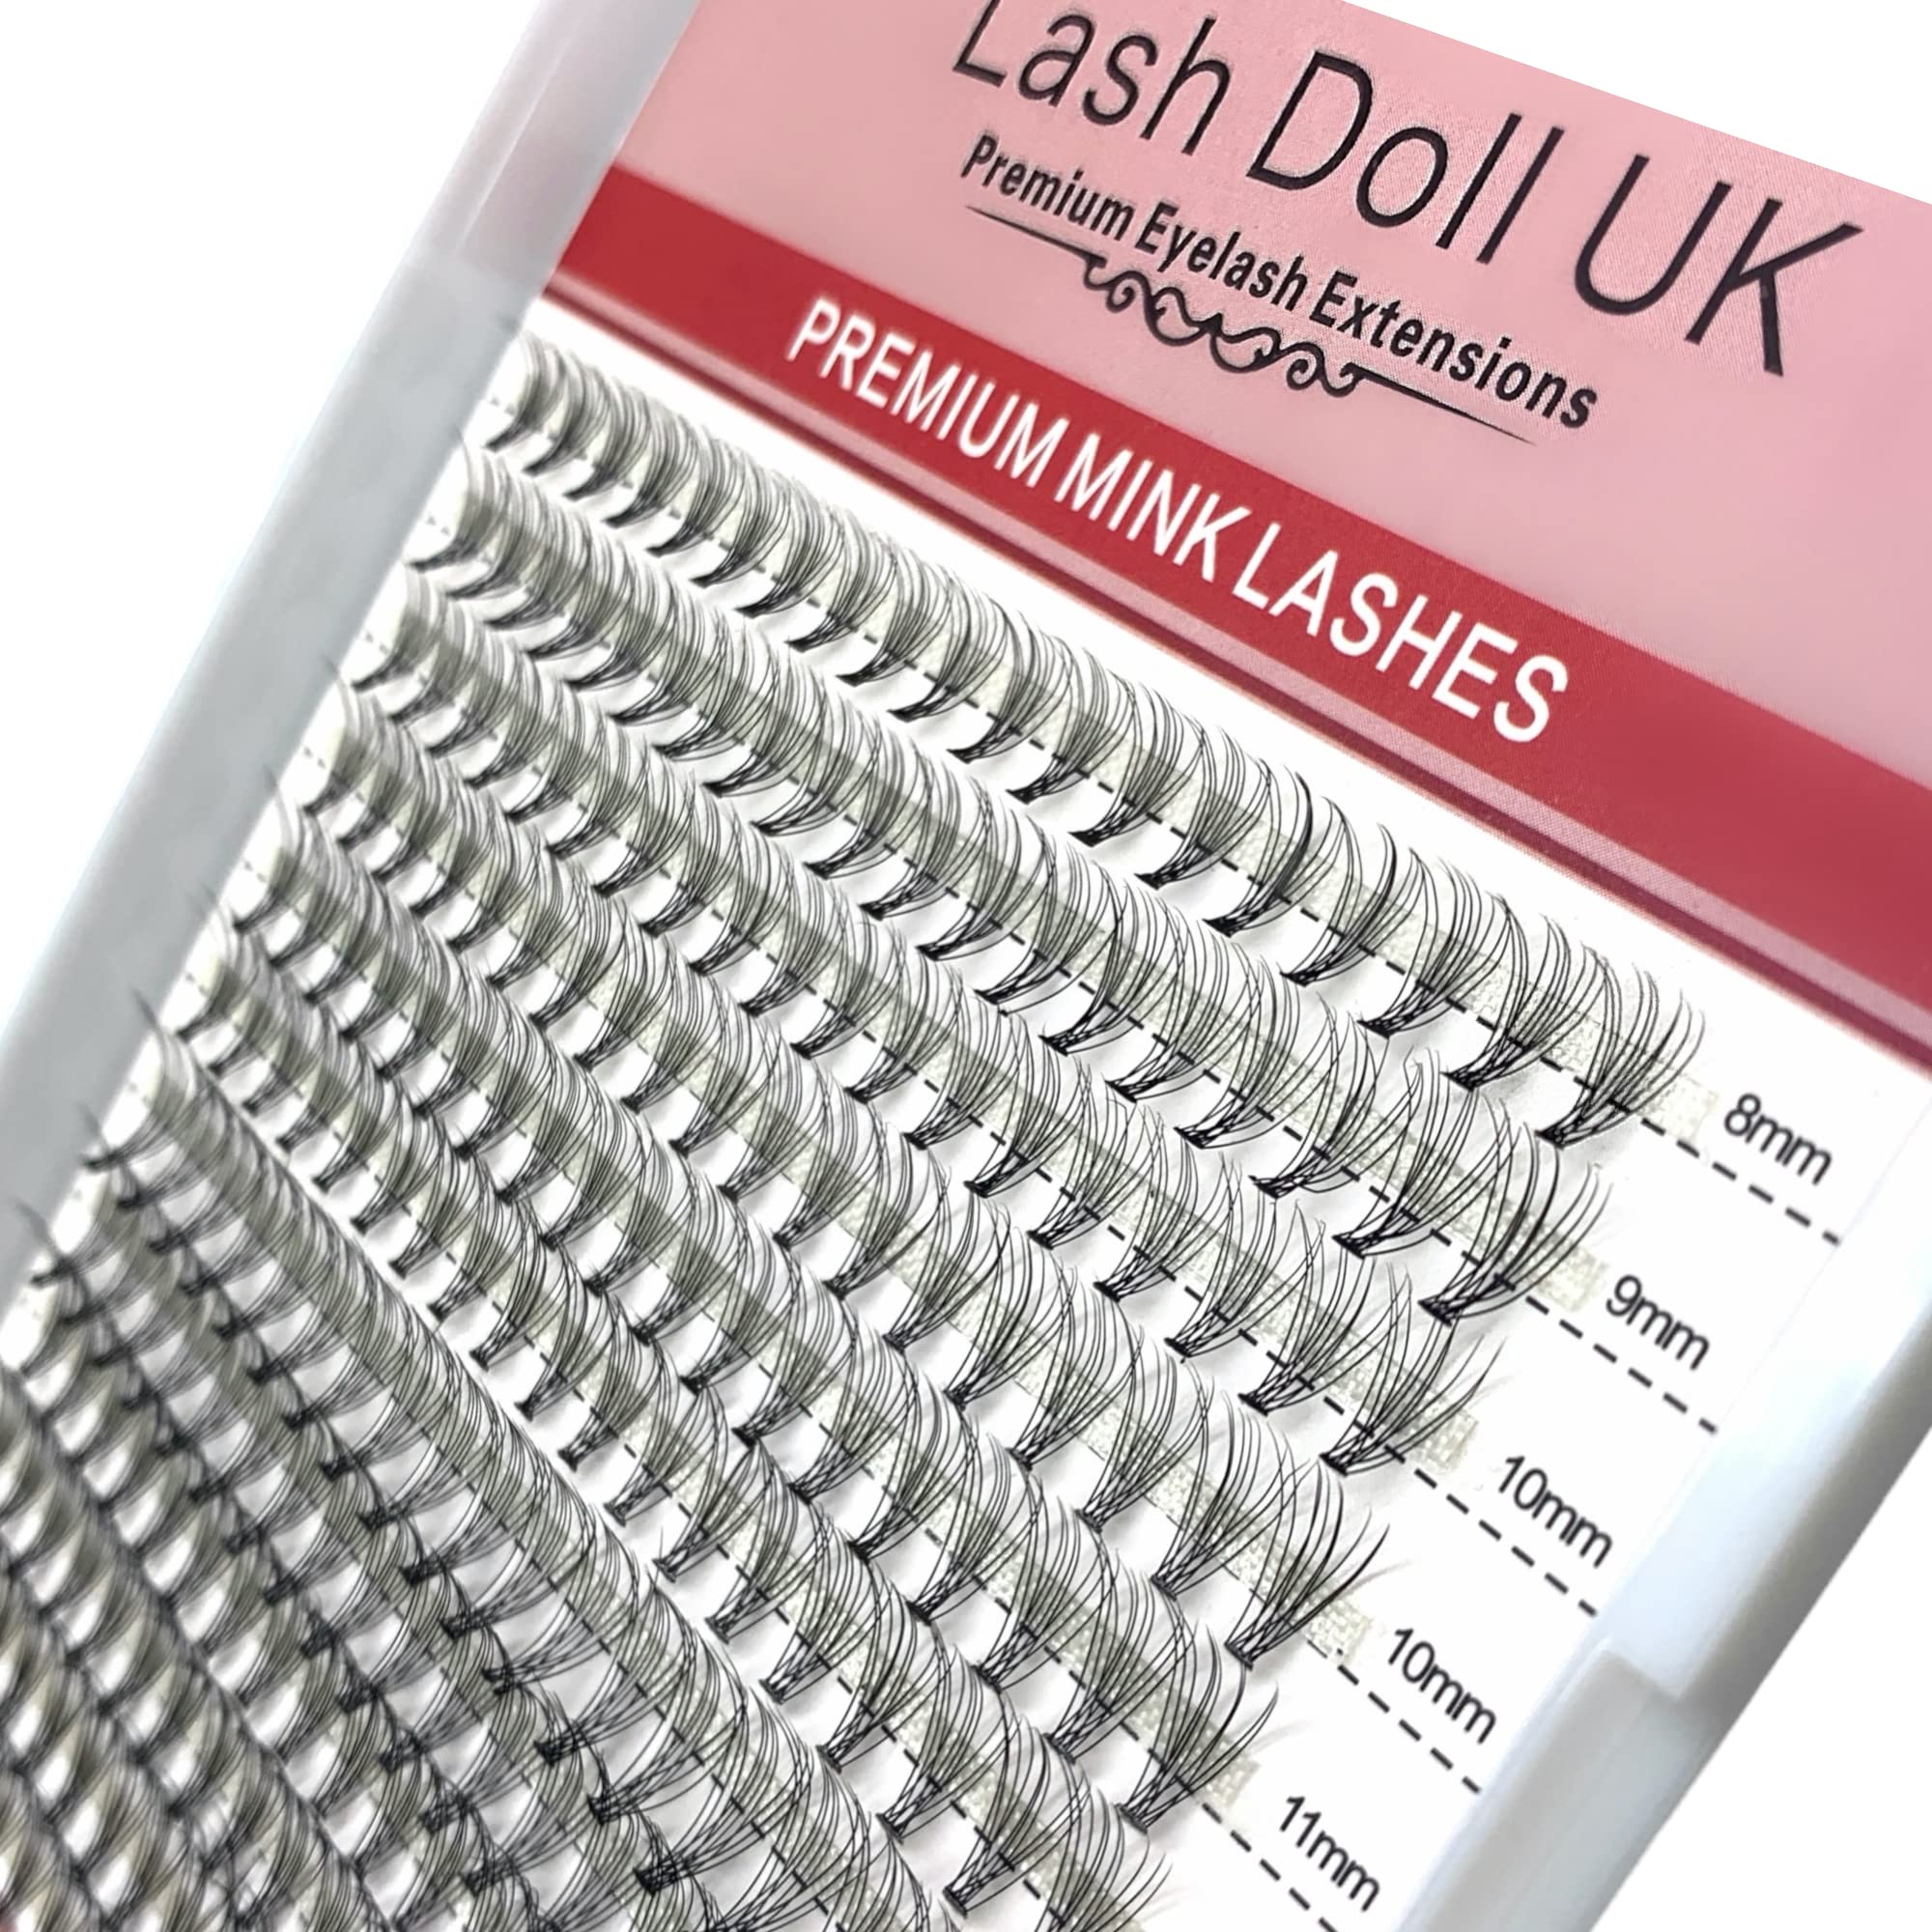 Premade Fan Cluster Lash Extensions - Lash Doll UK Company - 10D, 0.10 Thickness, D Curl, 8-15mm. Individual Lashes